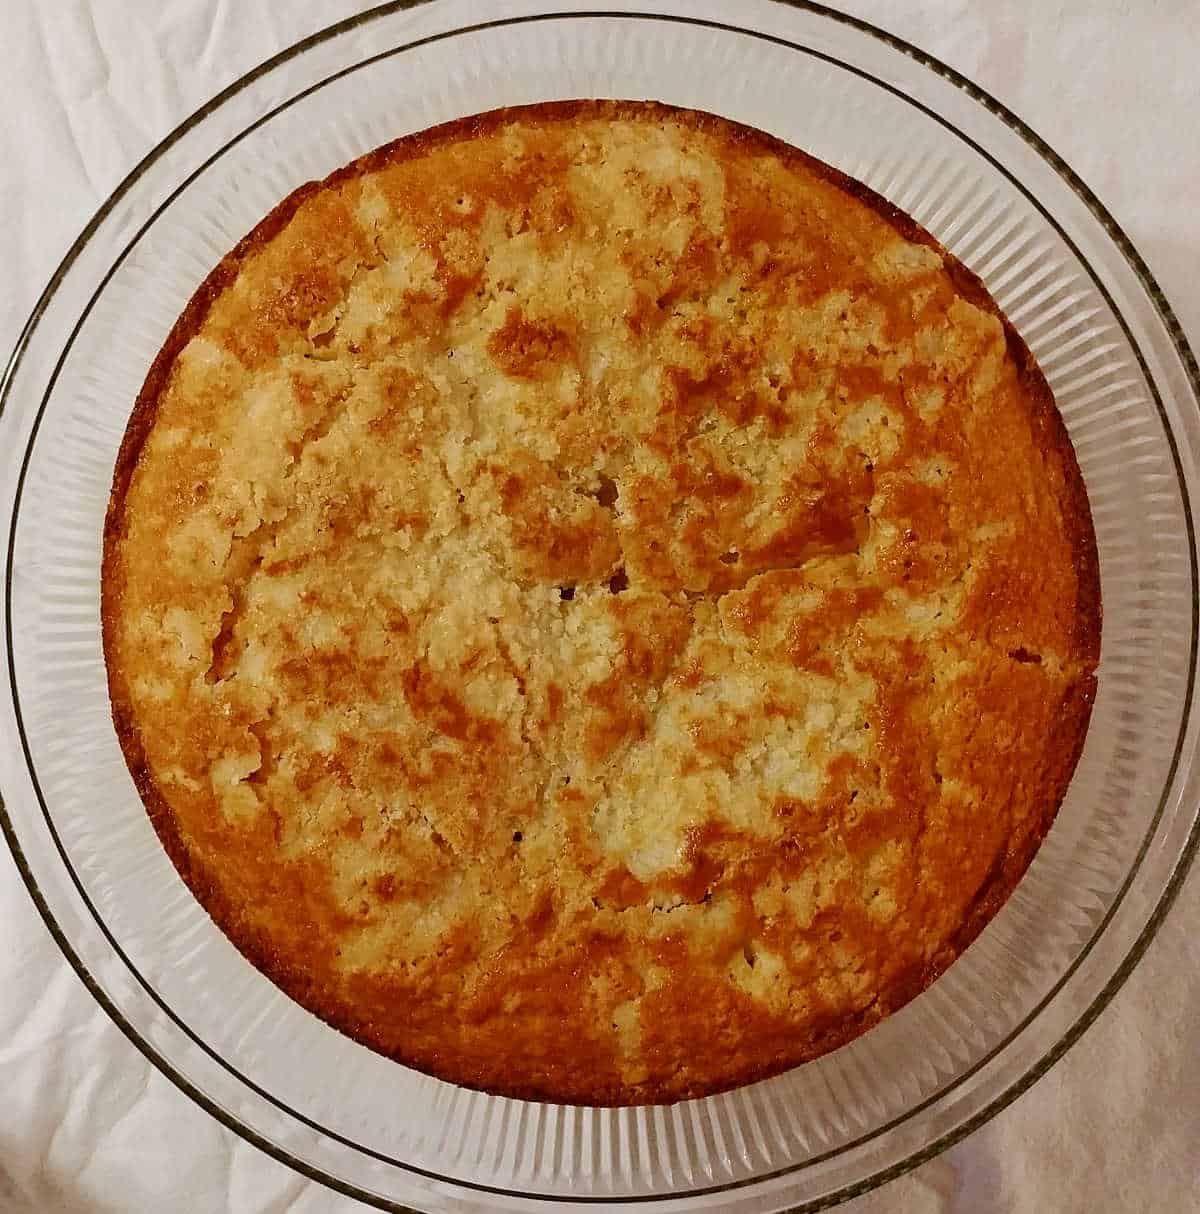 Cranberry Vanilla Coffee Cake, on a cake plate, seen from overhead